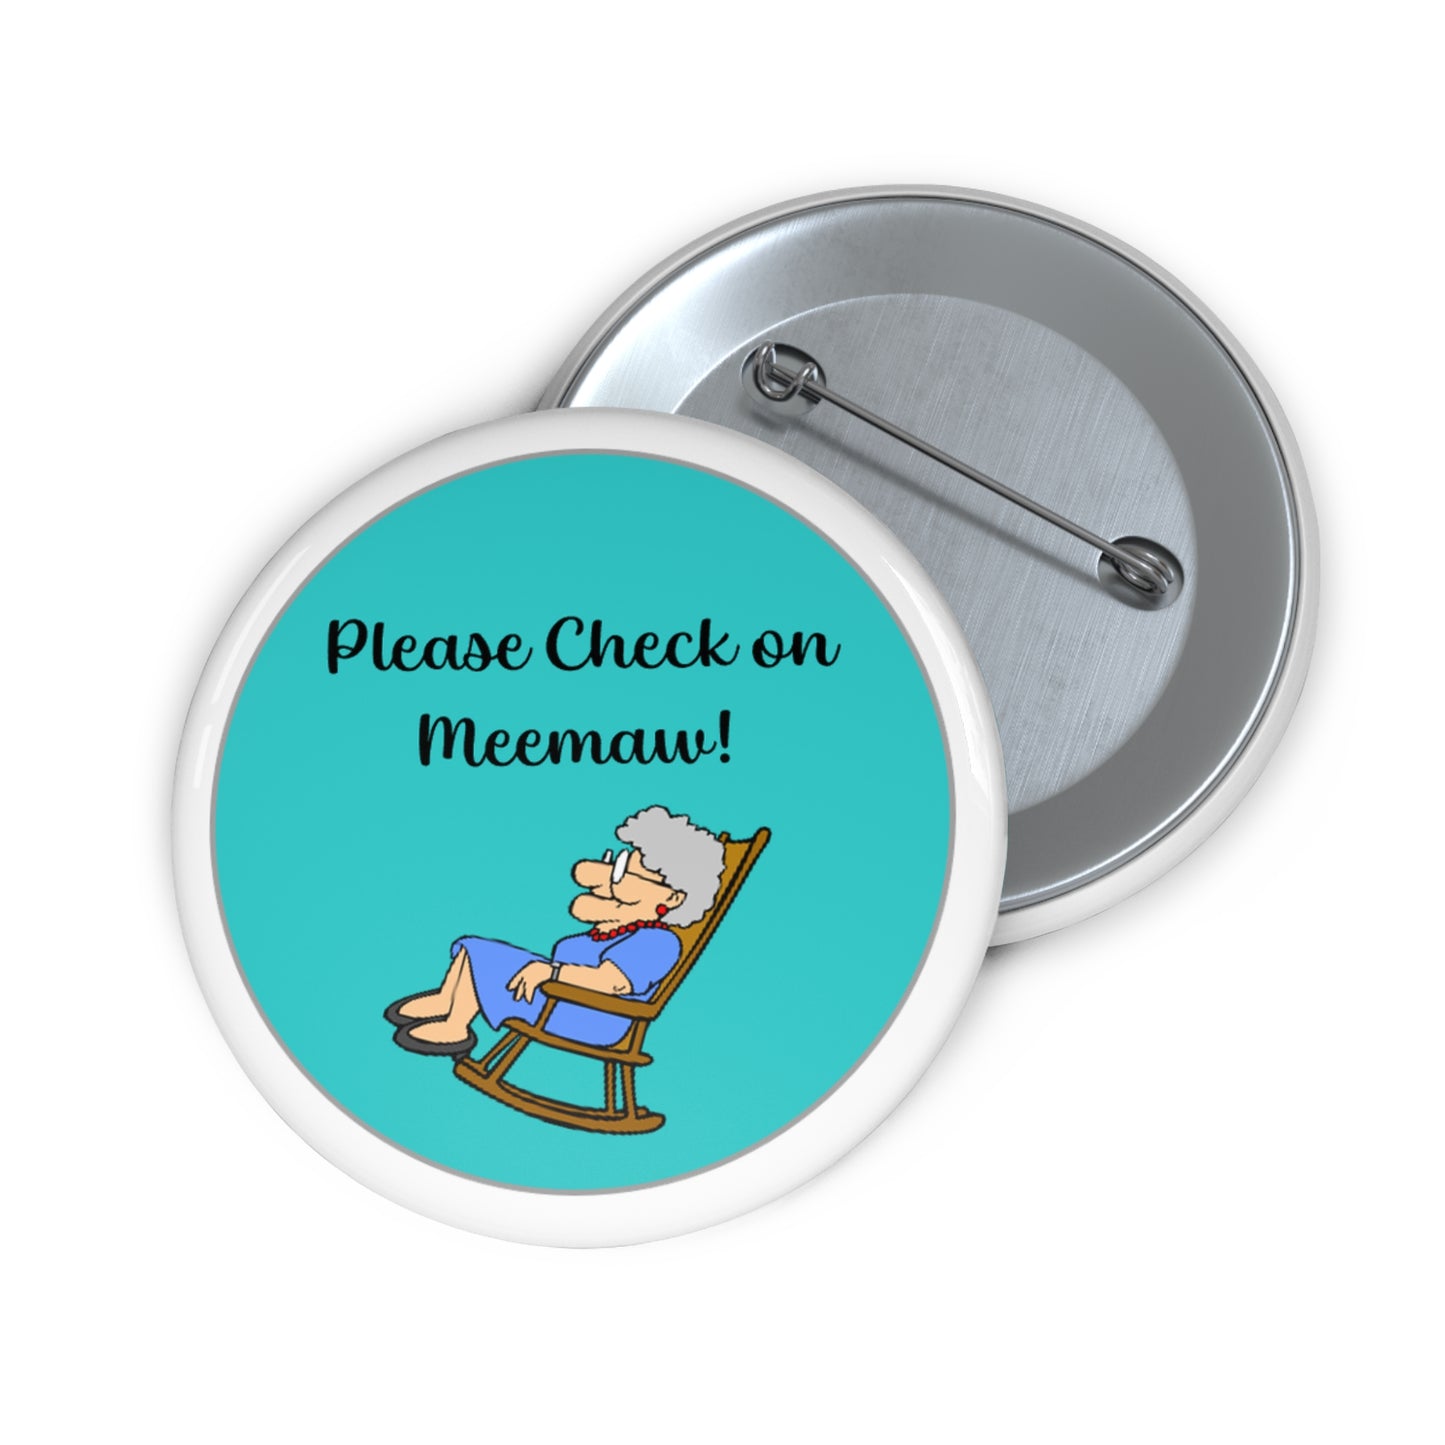 Check on Meemaw - Teal - Custom Pin Buttons